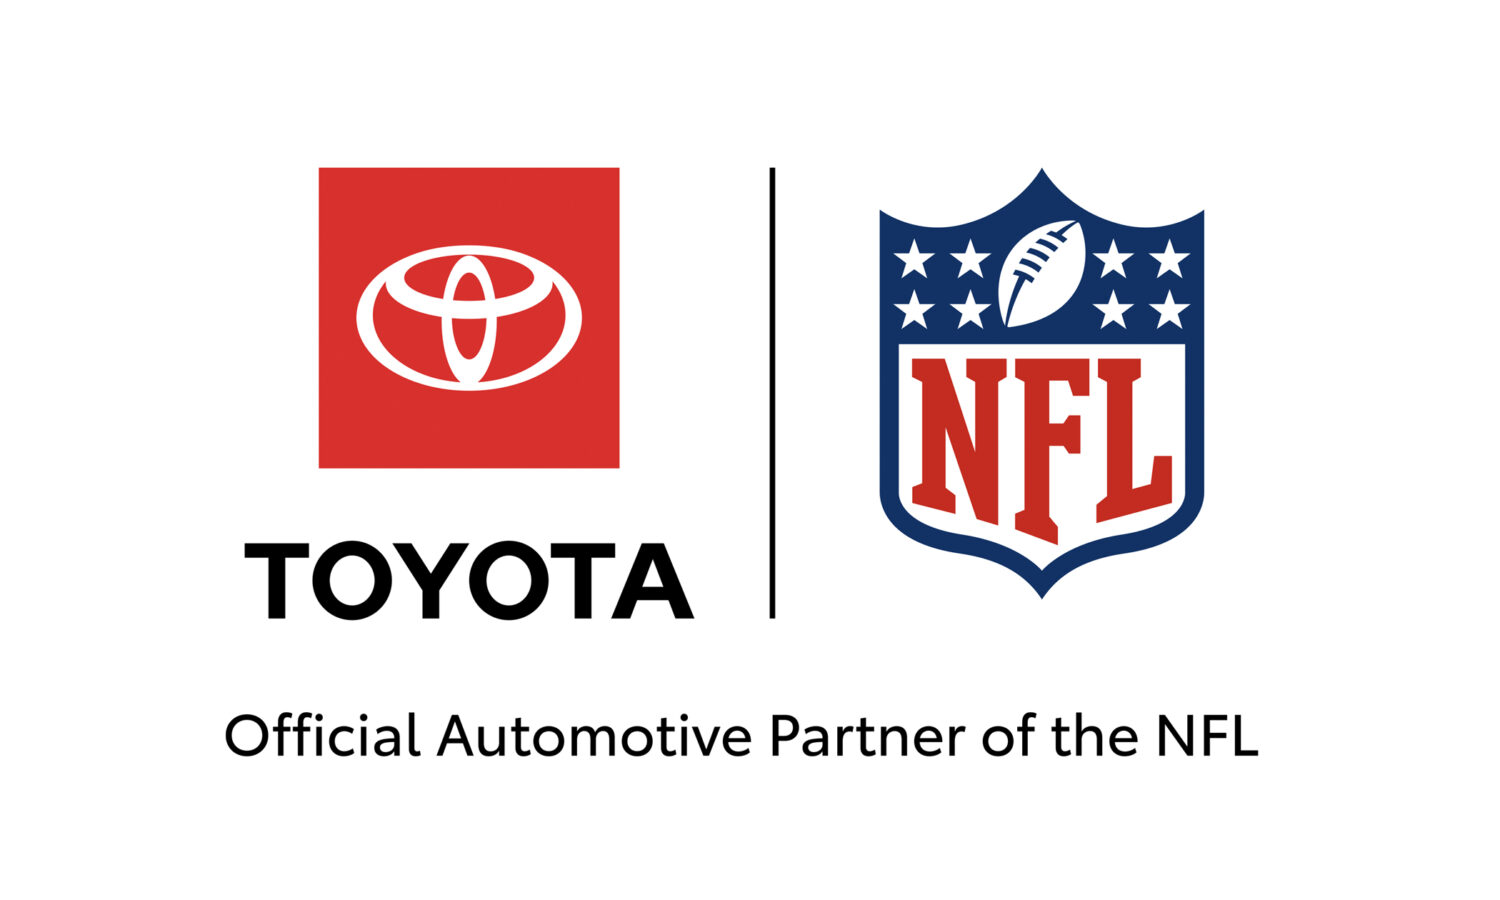 The NFL and Toyota logos next to each other.